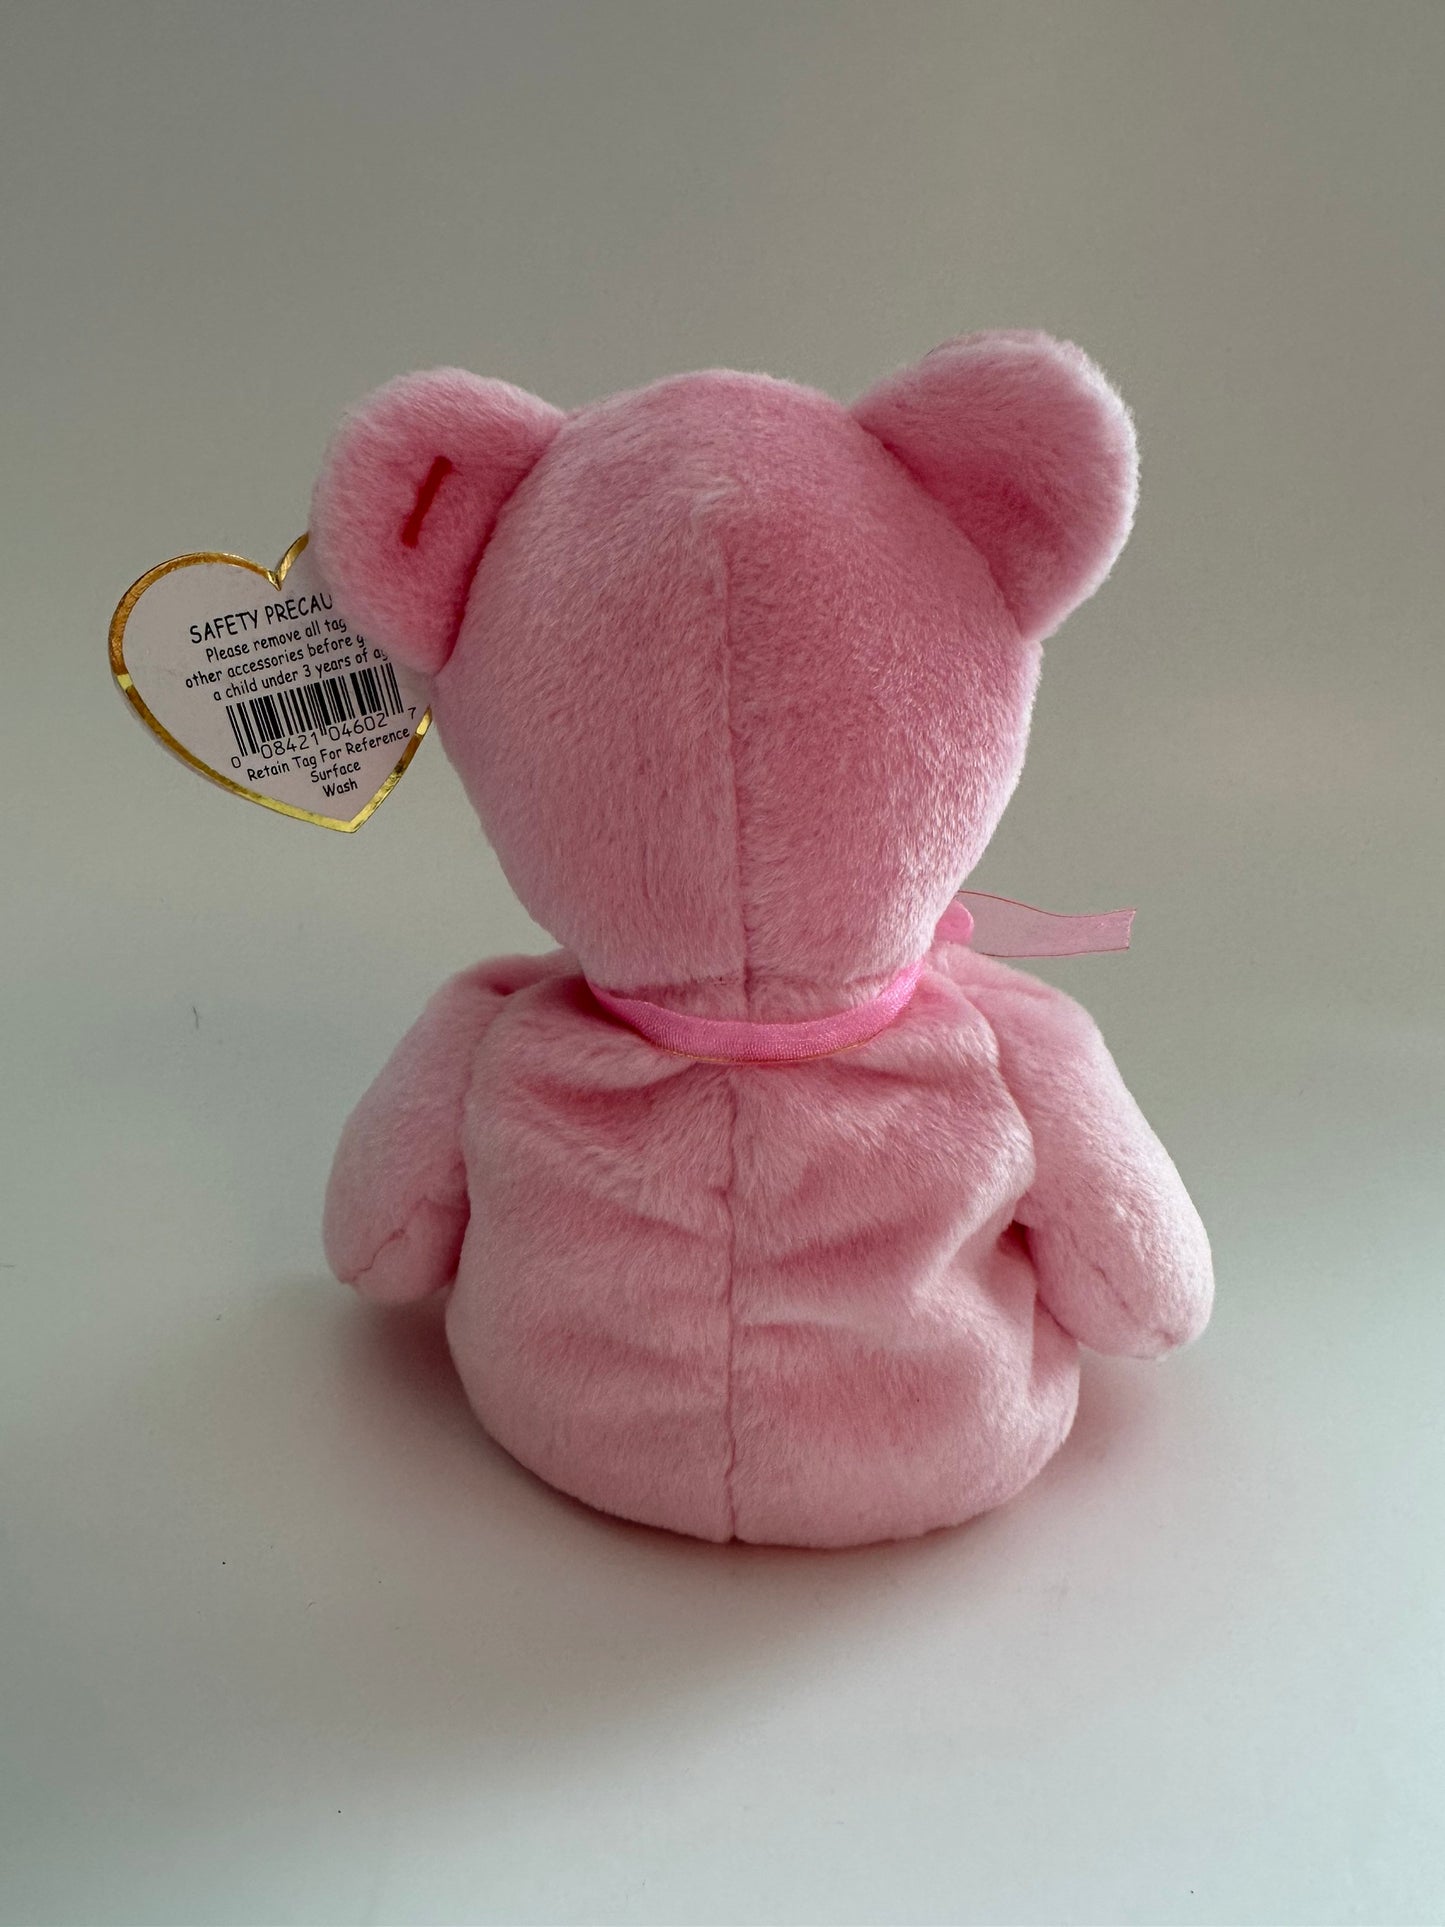 Ty Beanie Baby “Sakura” the Bear - 1st release with 2000 Hang Tag - Japan Exclusive *Rare* (8.5 inch)